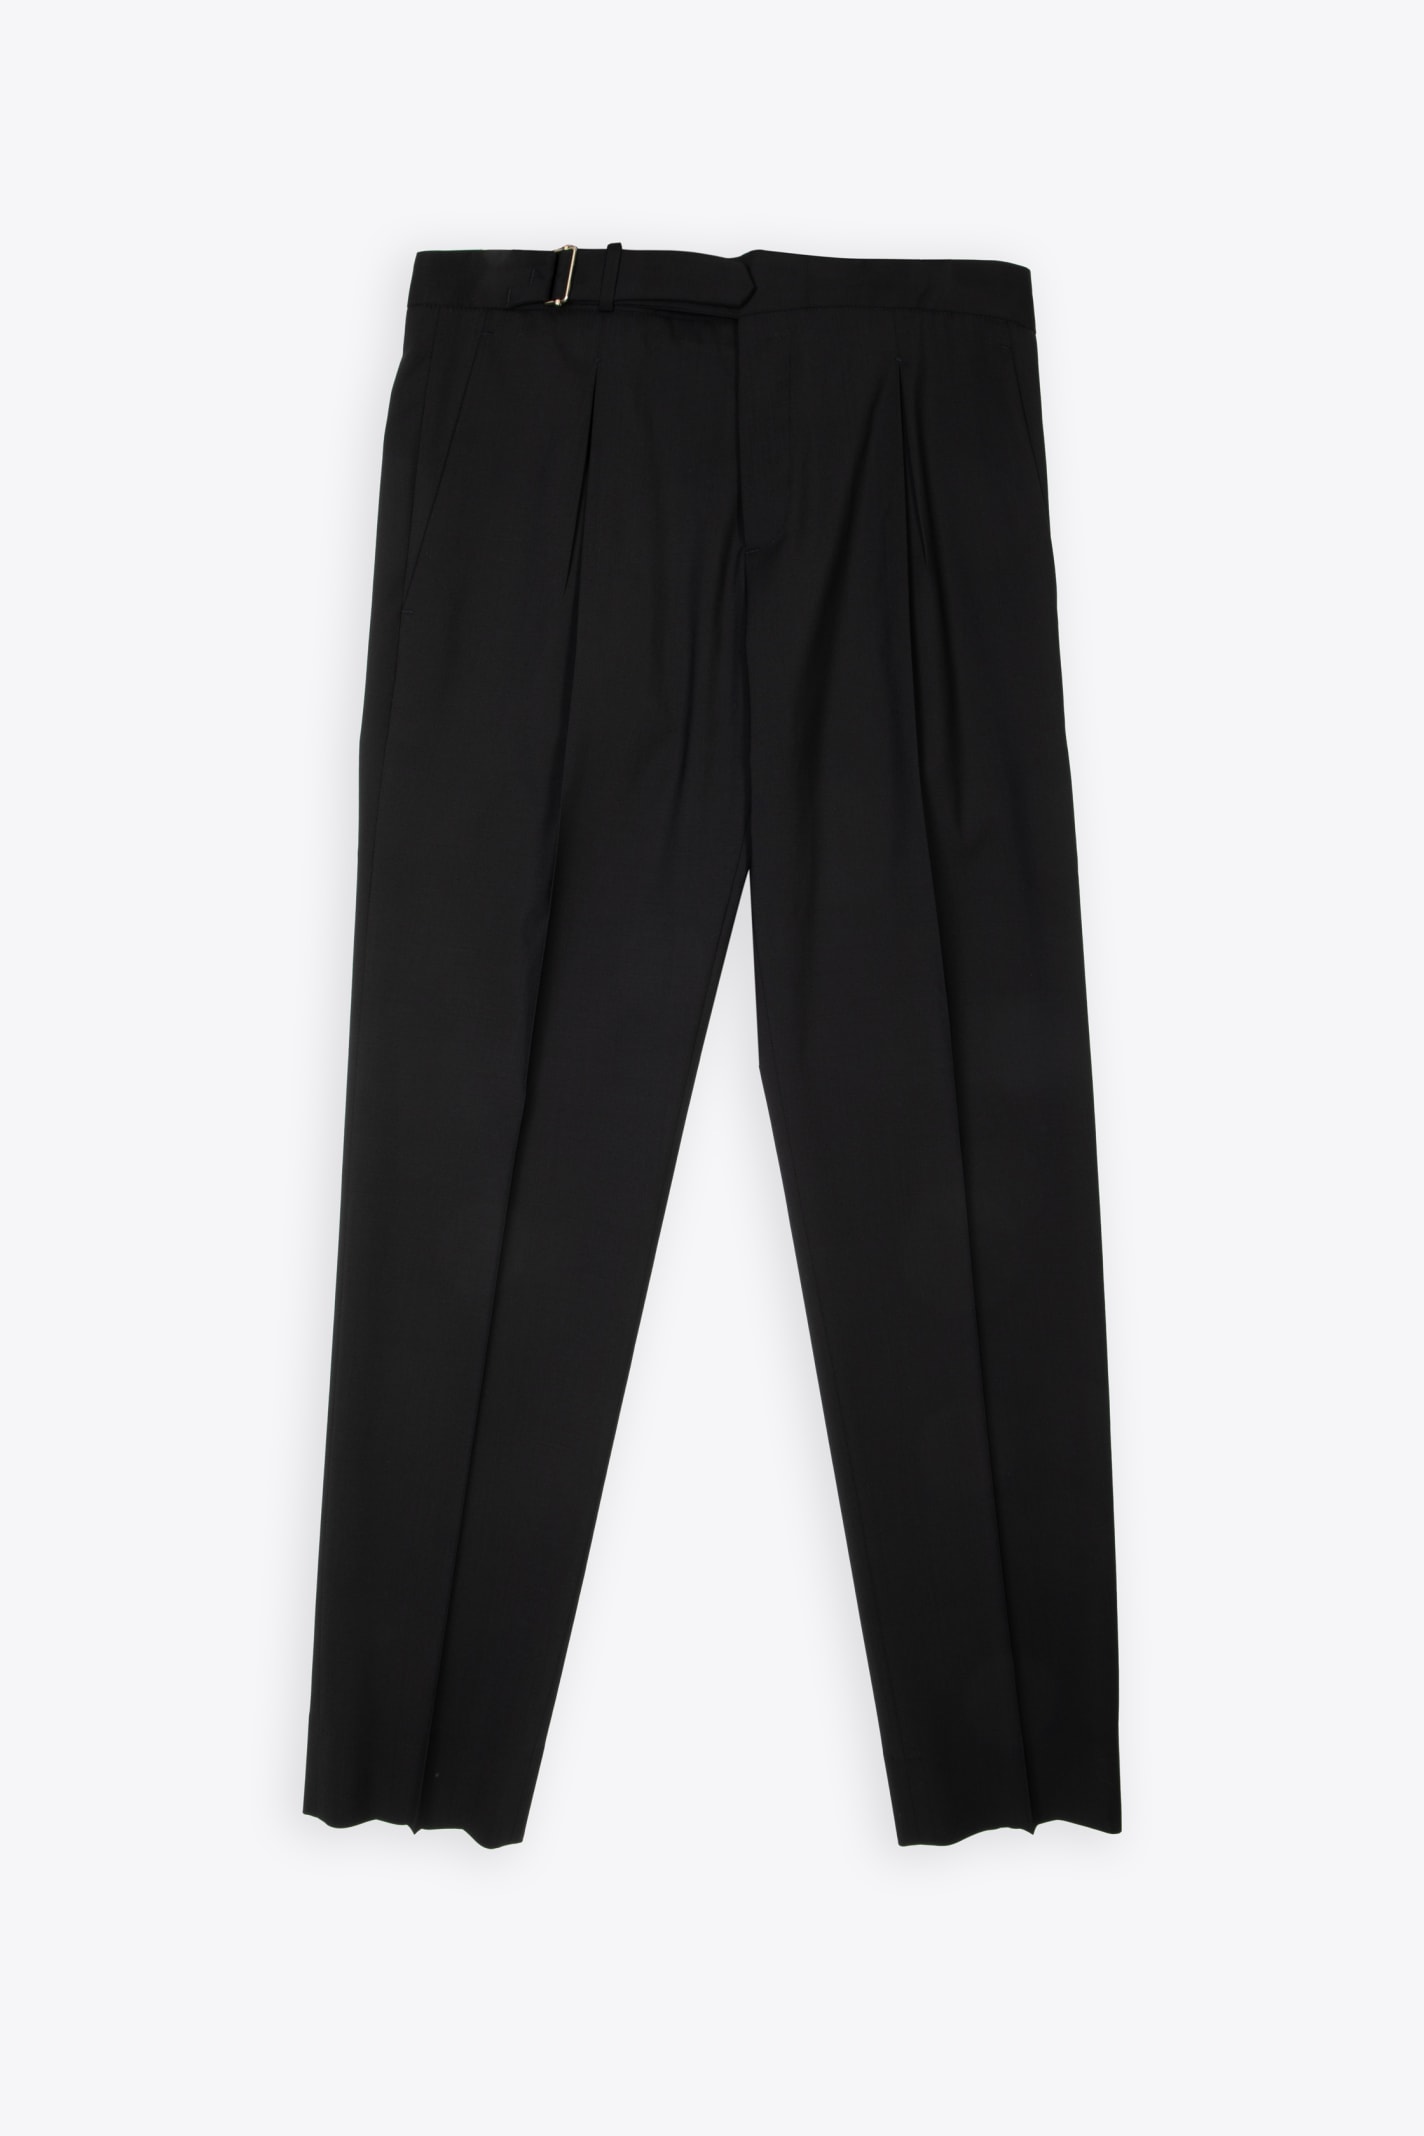 Pantalone Black wool tailored pant with belt - Piccadilly